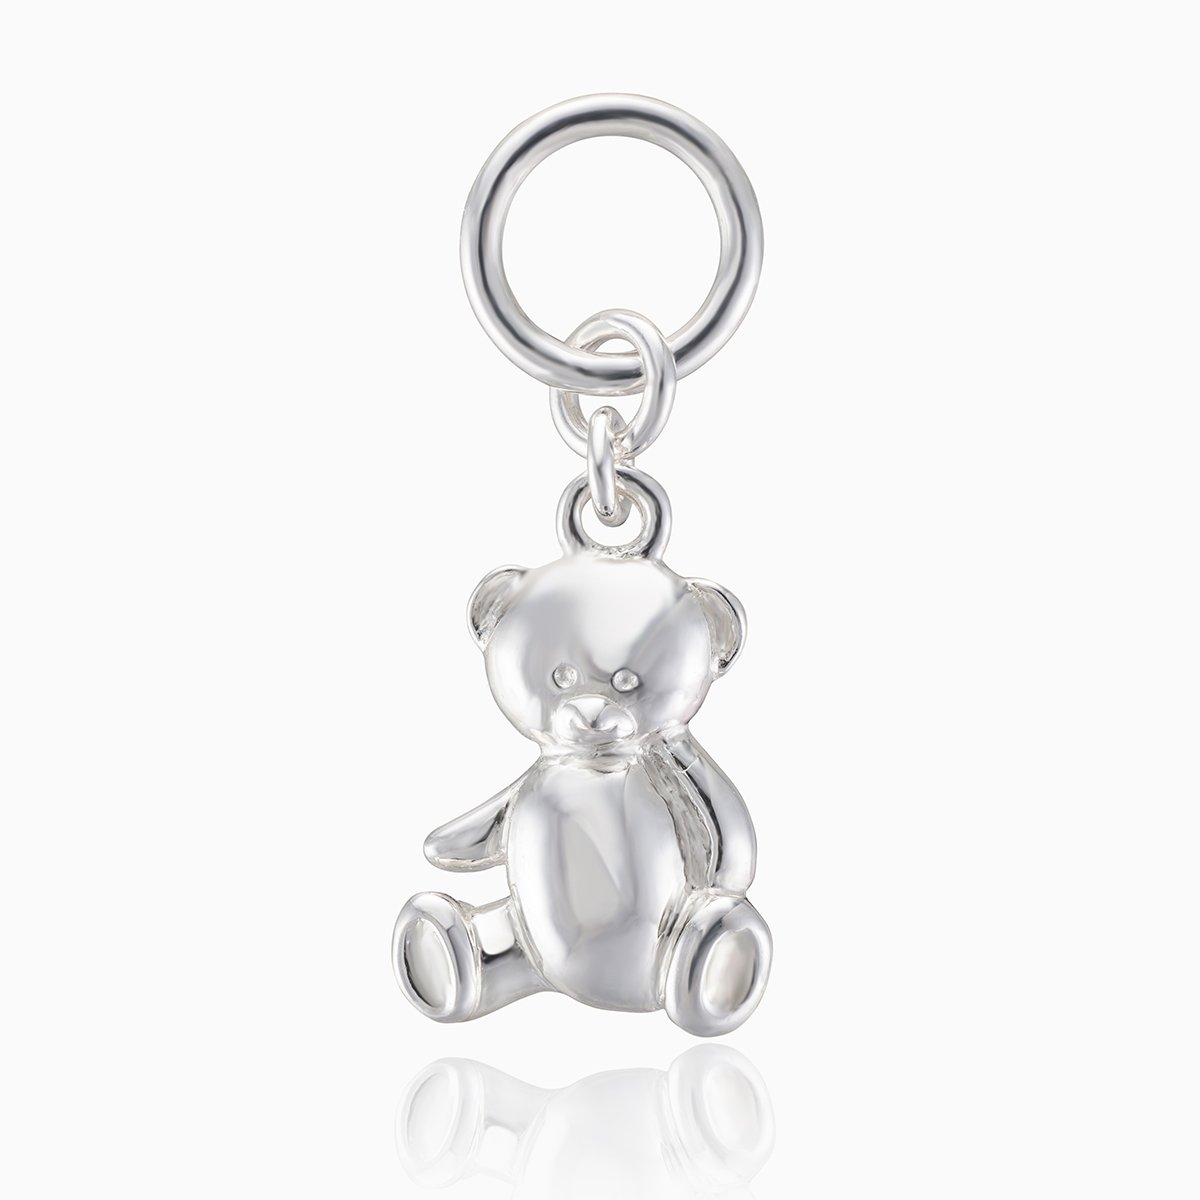 Product title: Teddy Charm, product type: Charm